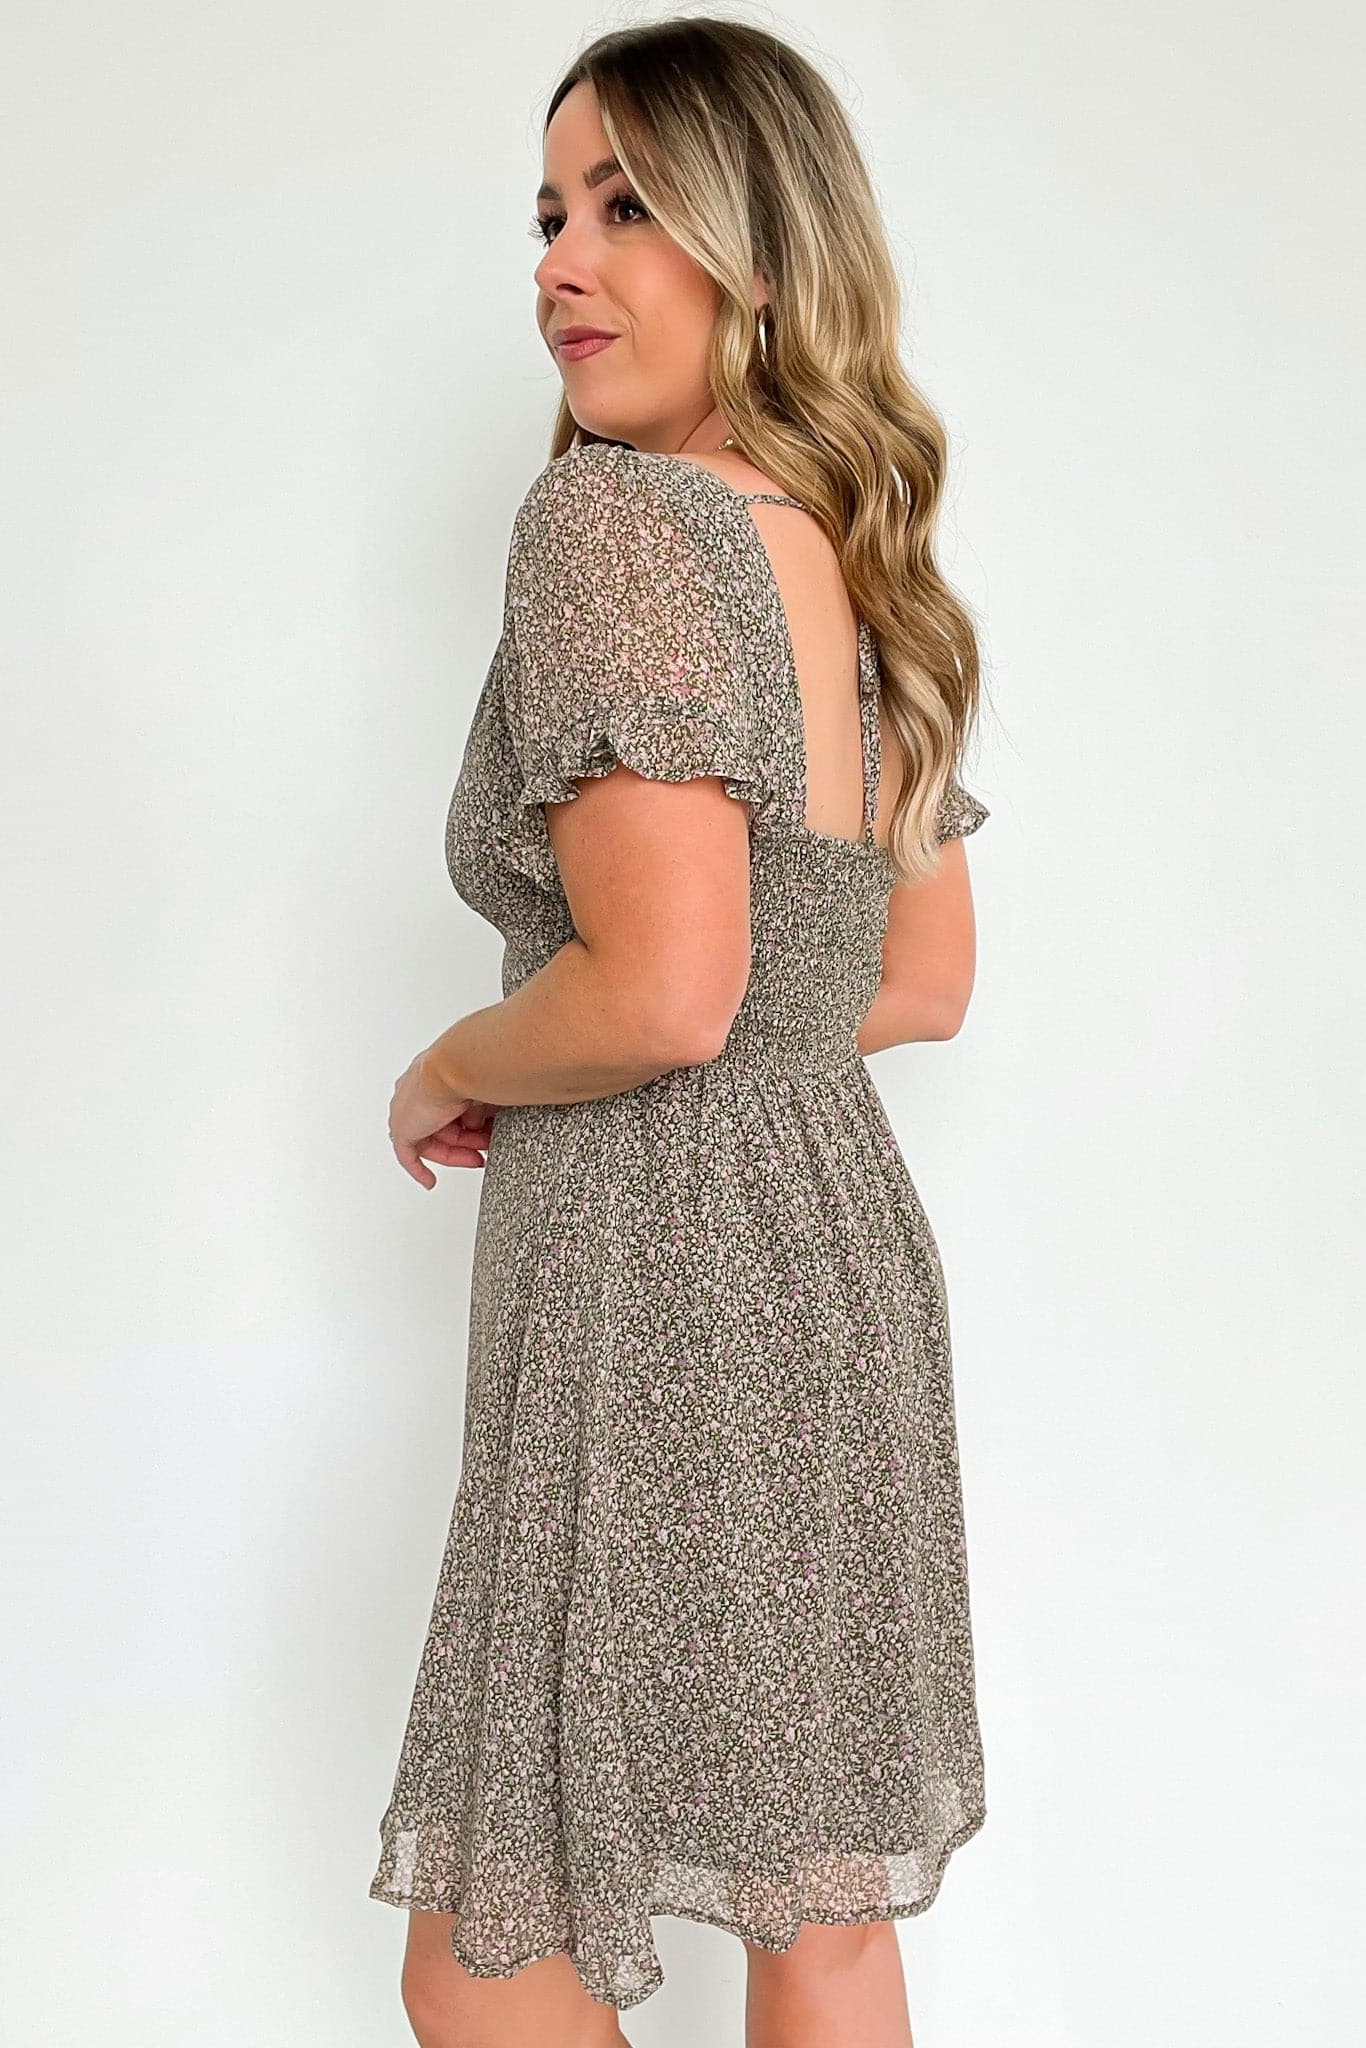  Roxanah Floral Ruffle Button Dress - FINAL SALE - Madison and Mallory